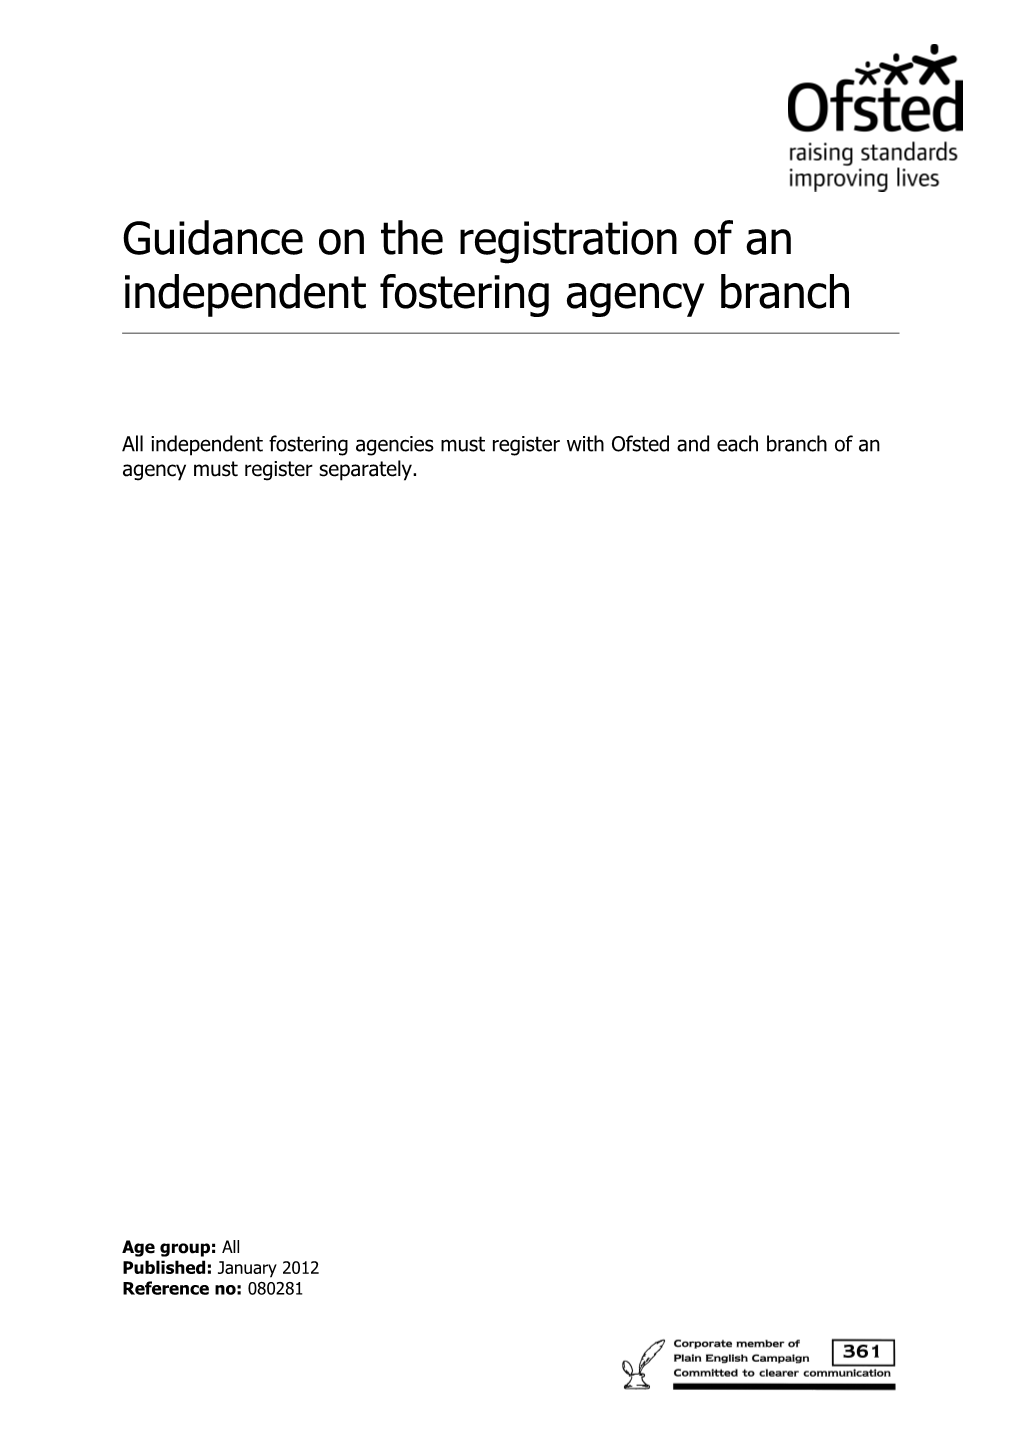 Guidance on Registration of IFA Branch